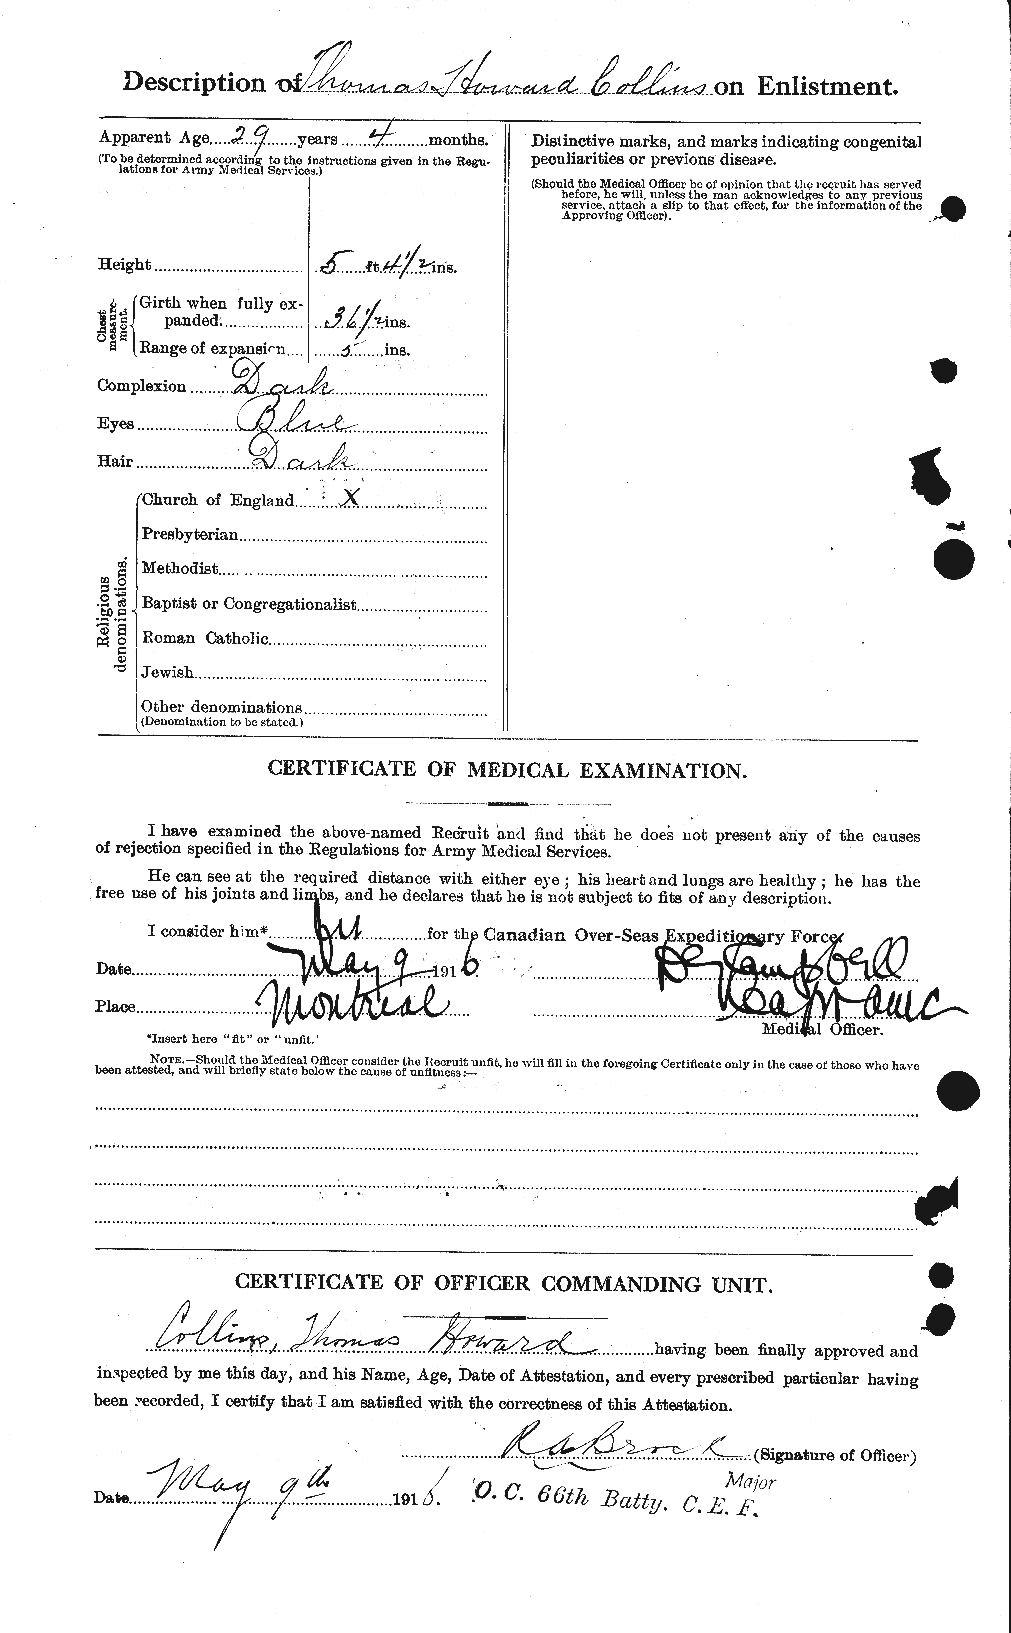 Personnel Records of the First World War - CEF 069126b